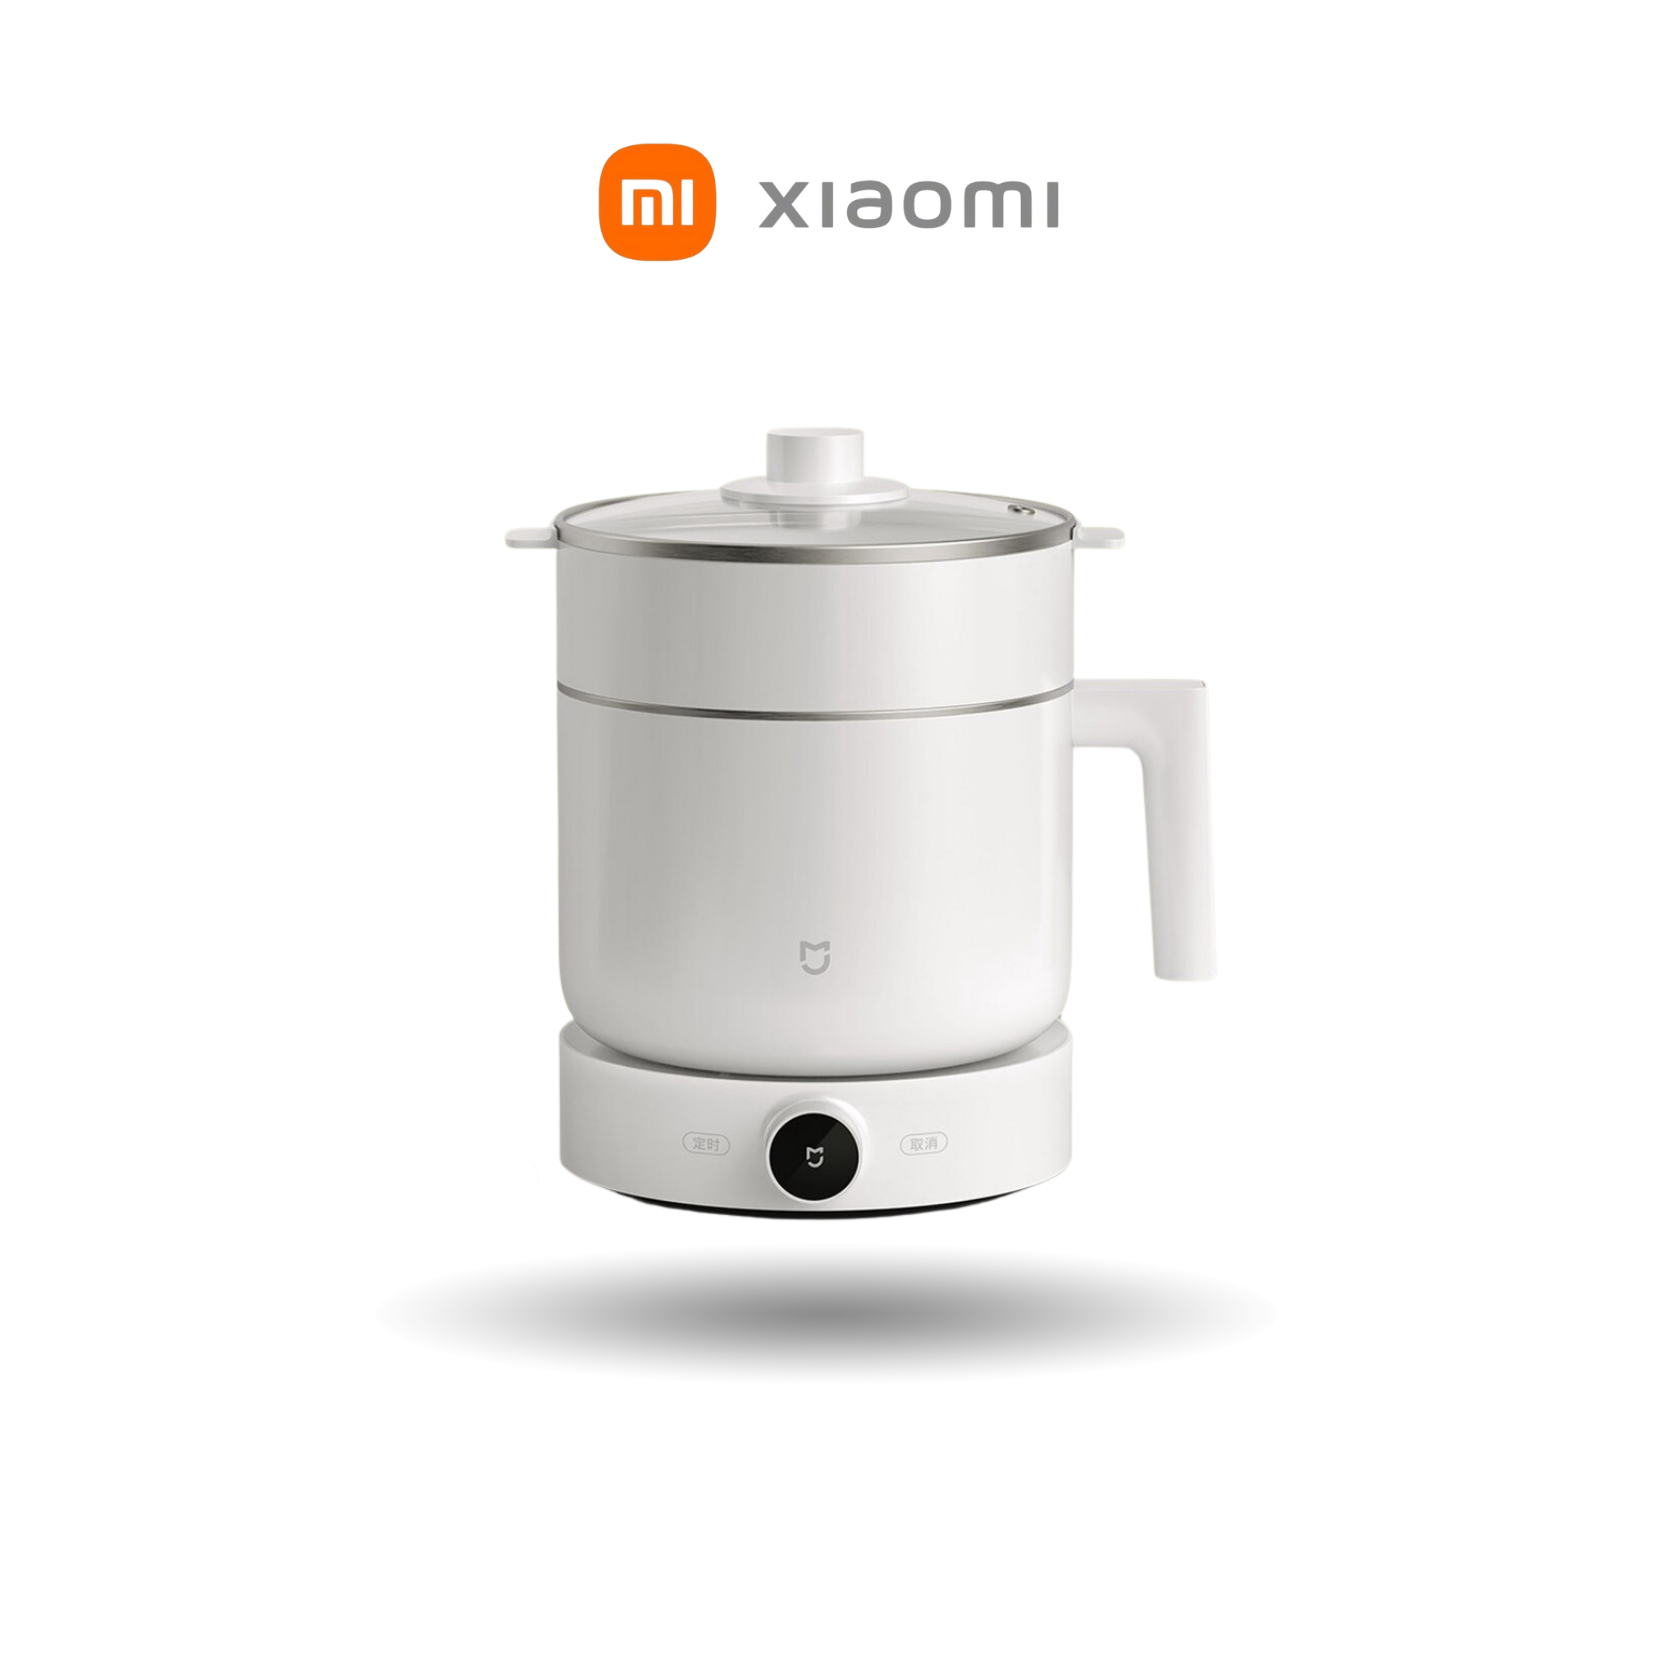 Xiaomi Smart Multi-Function Cooking Pot 1.5L - 1000W of Power 9 Cooking Modes Non Stick Material